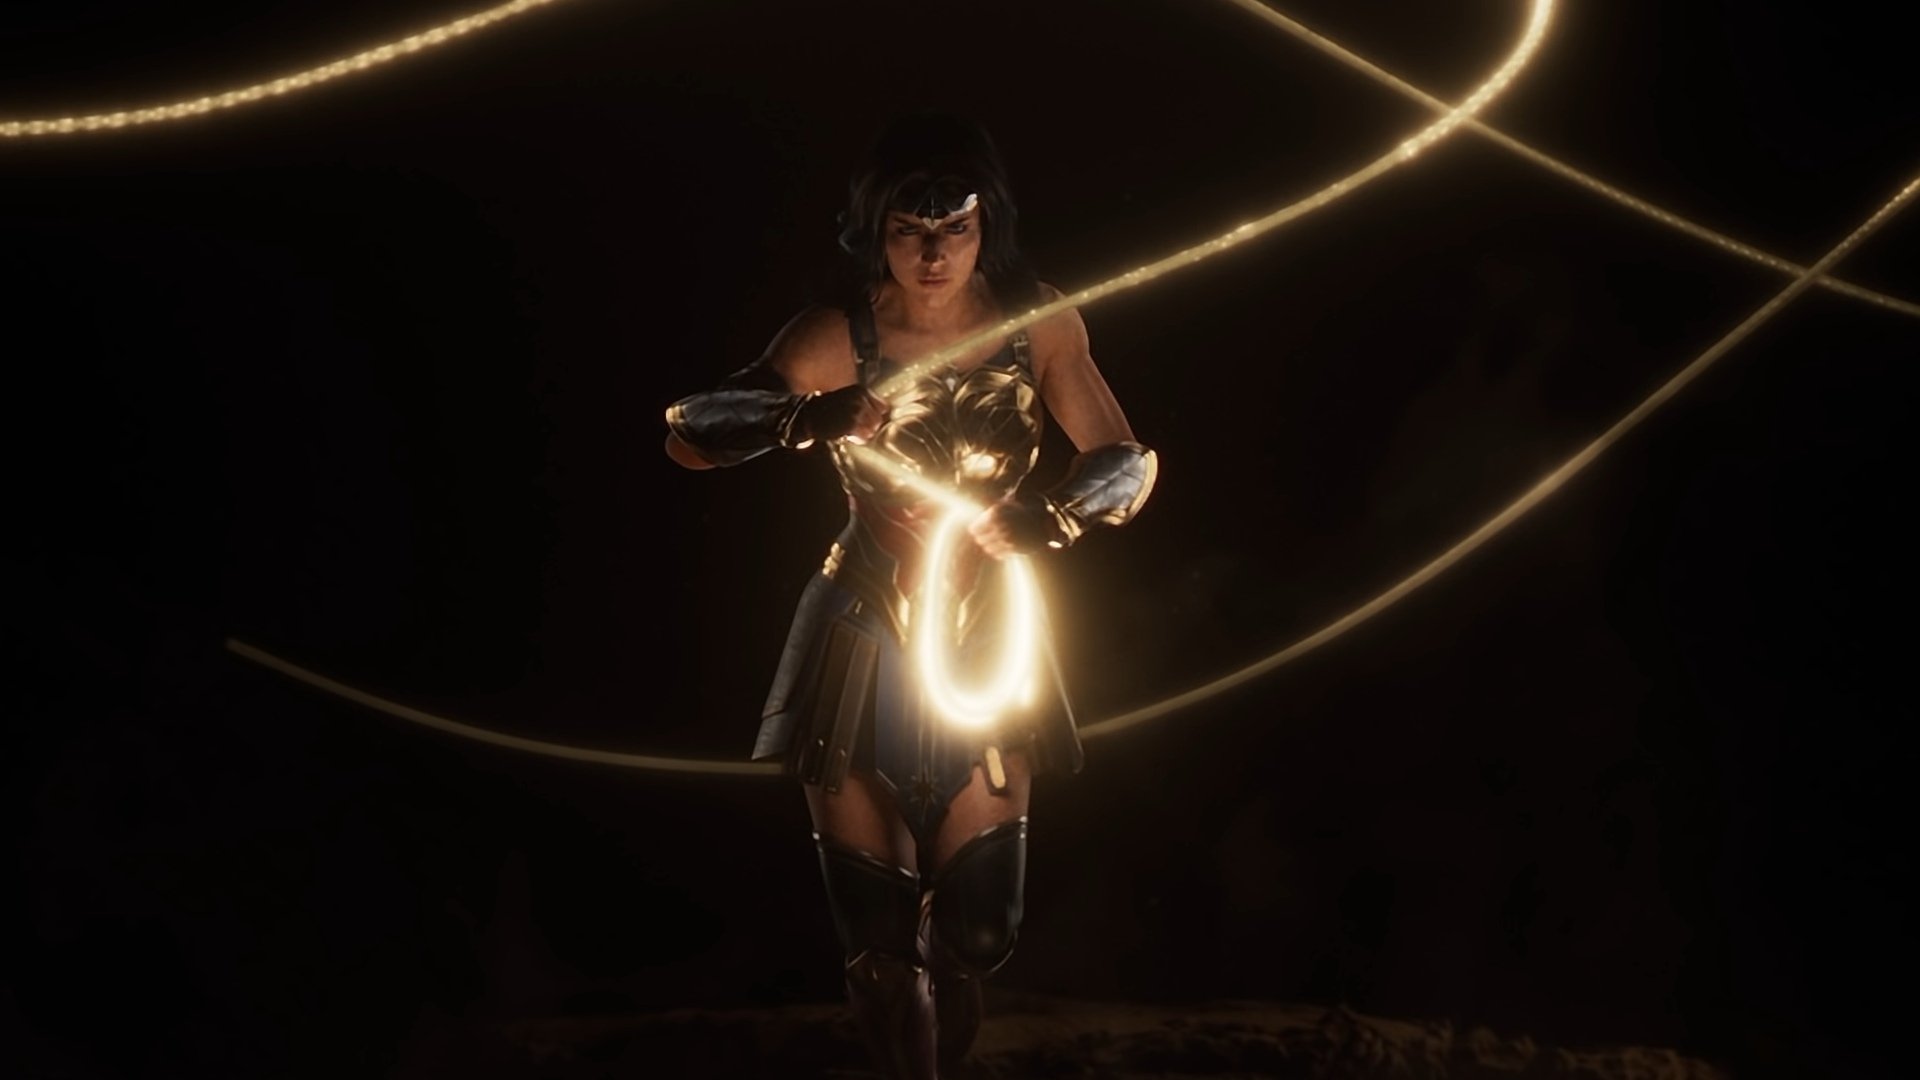 Wonder Woman is one of the notable AAA titles coming soon without any live-service elements